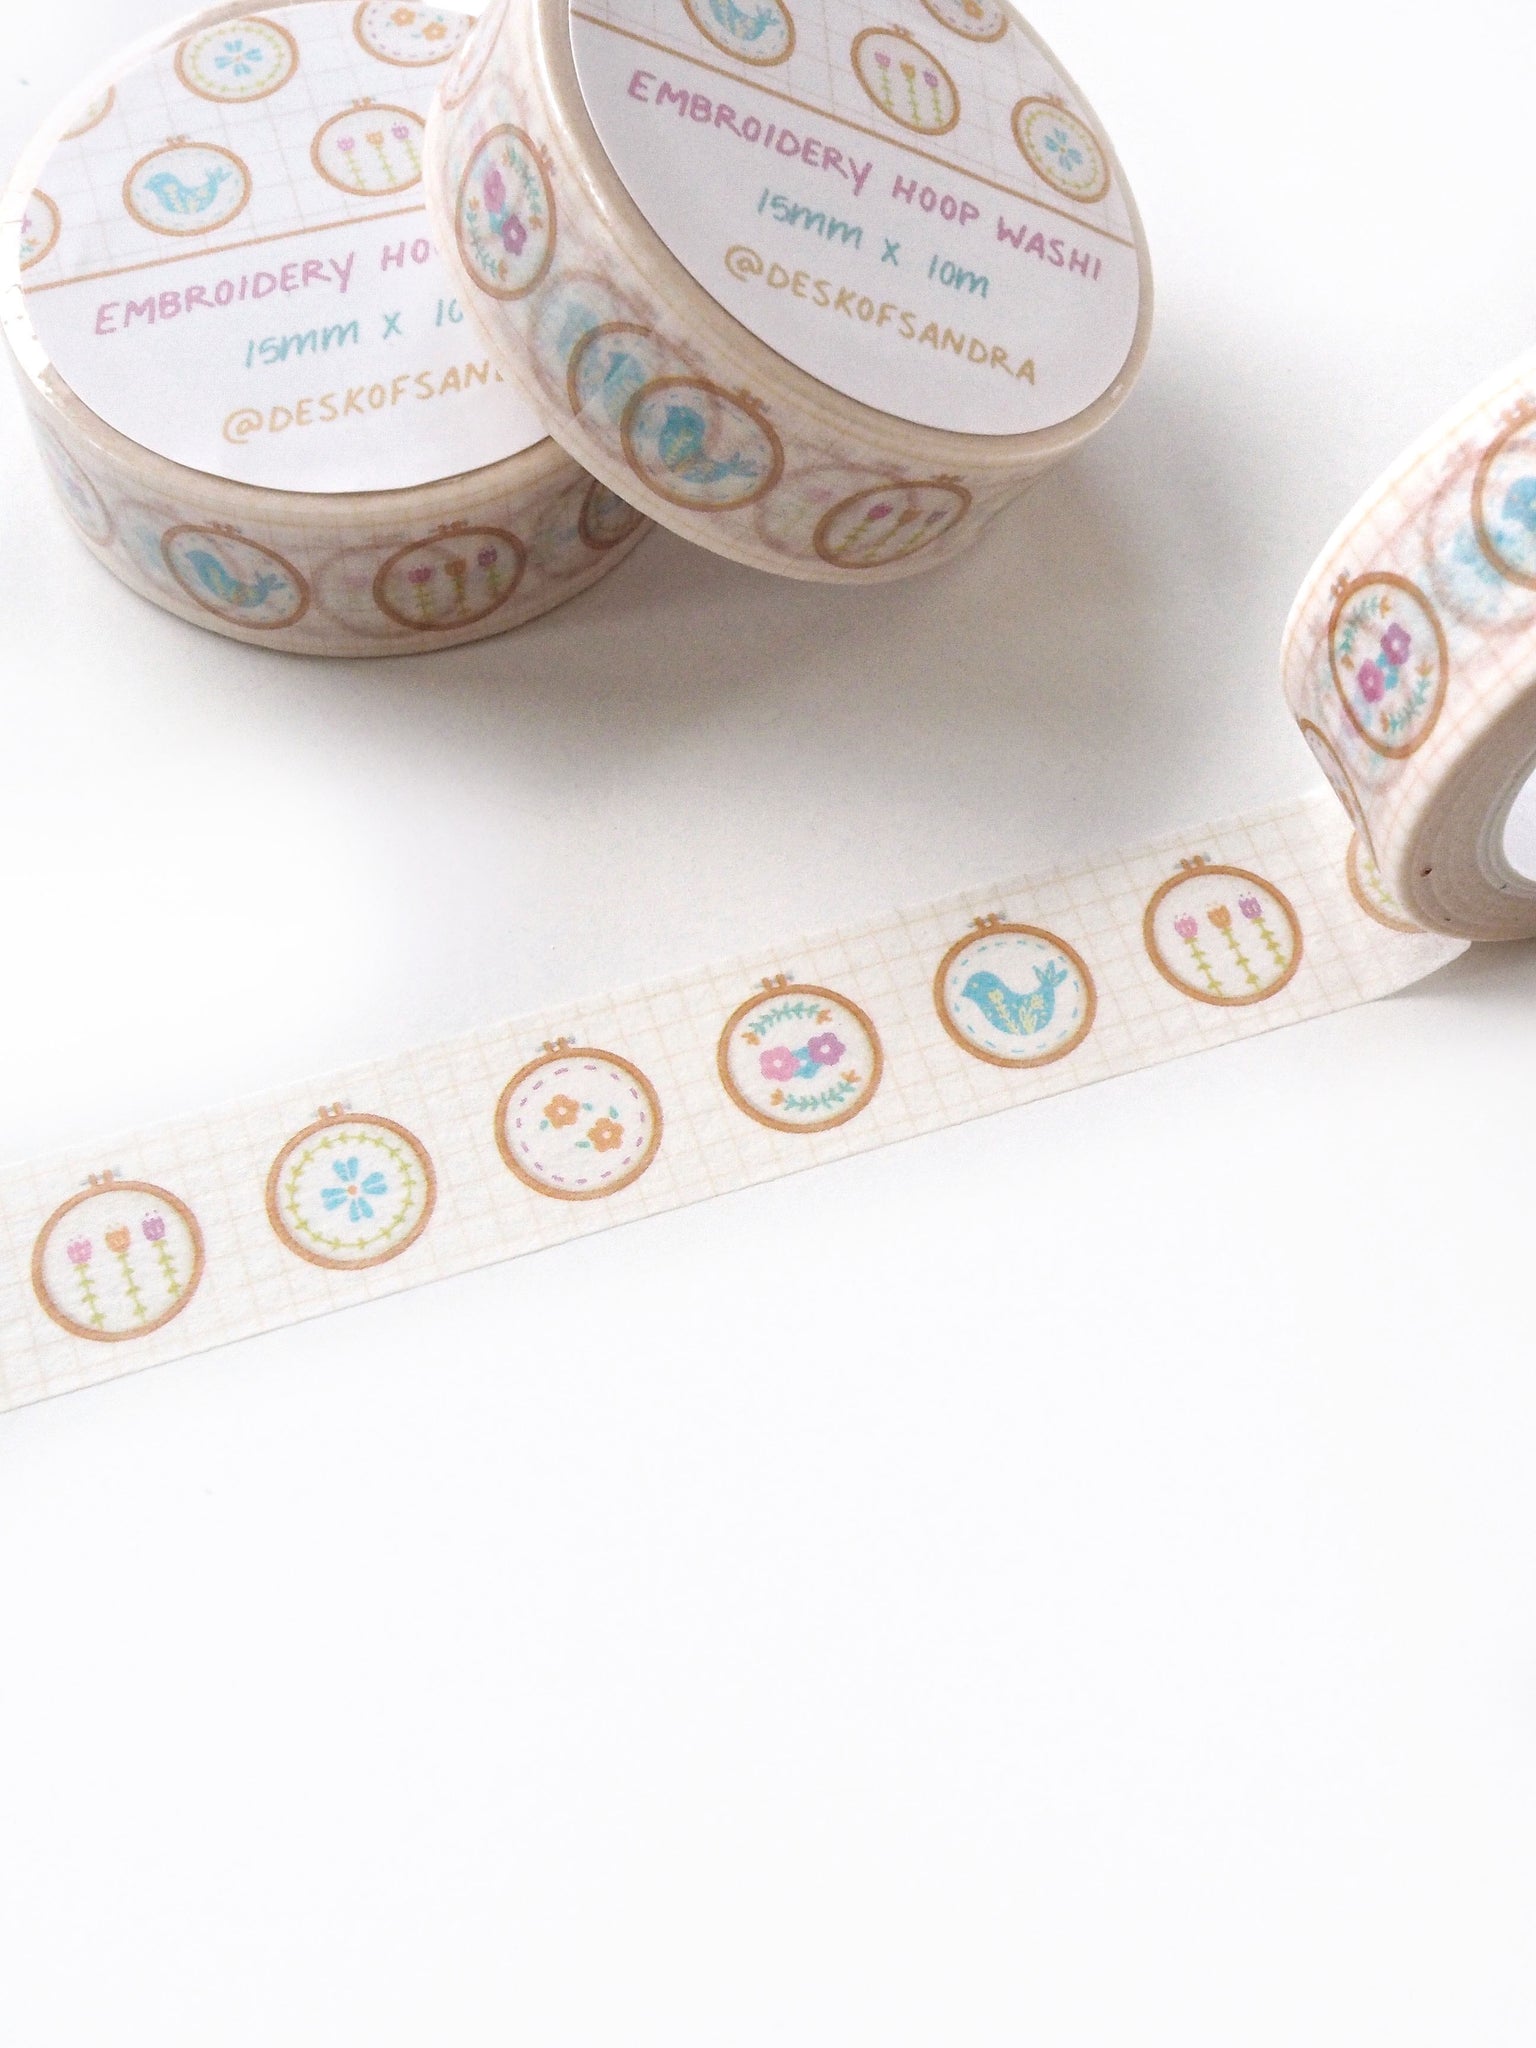 Embroidery Hoop Washi Tape